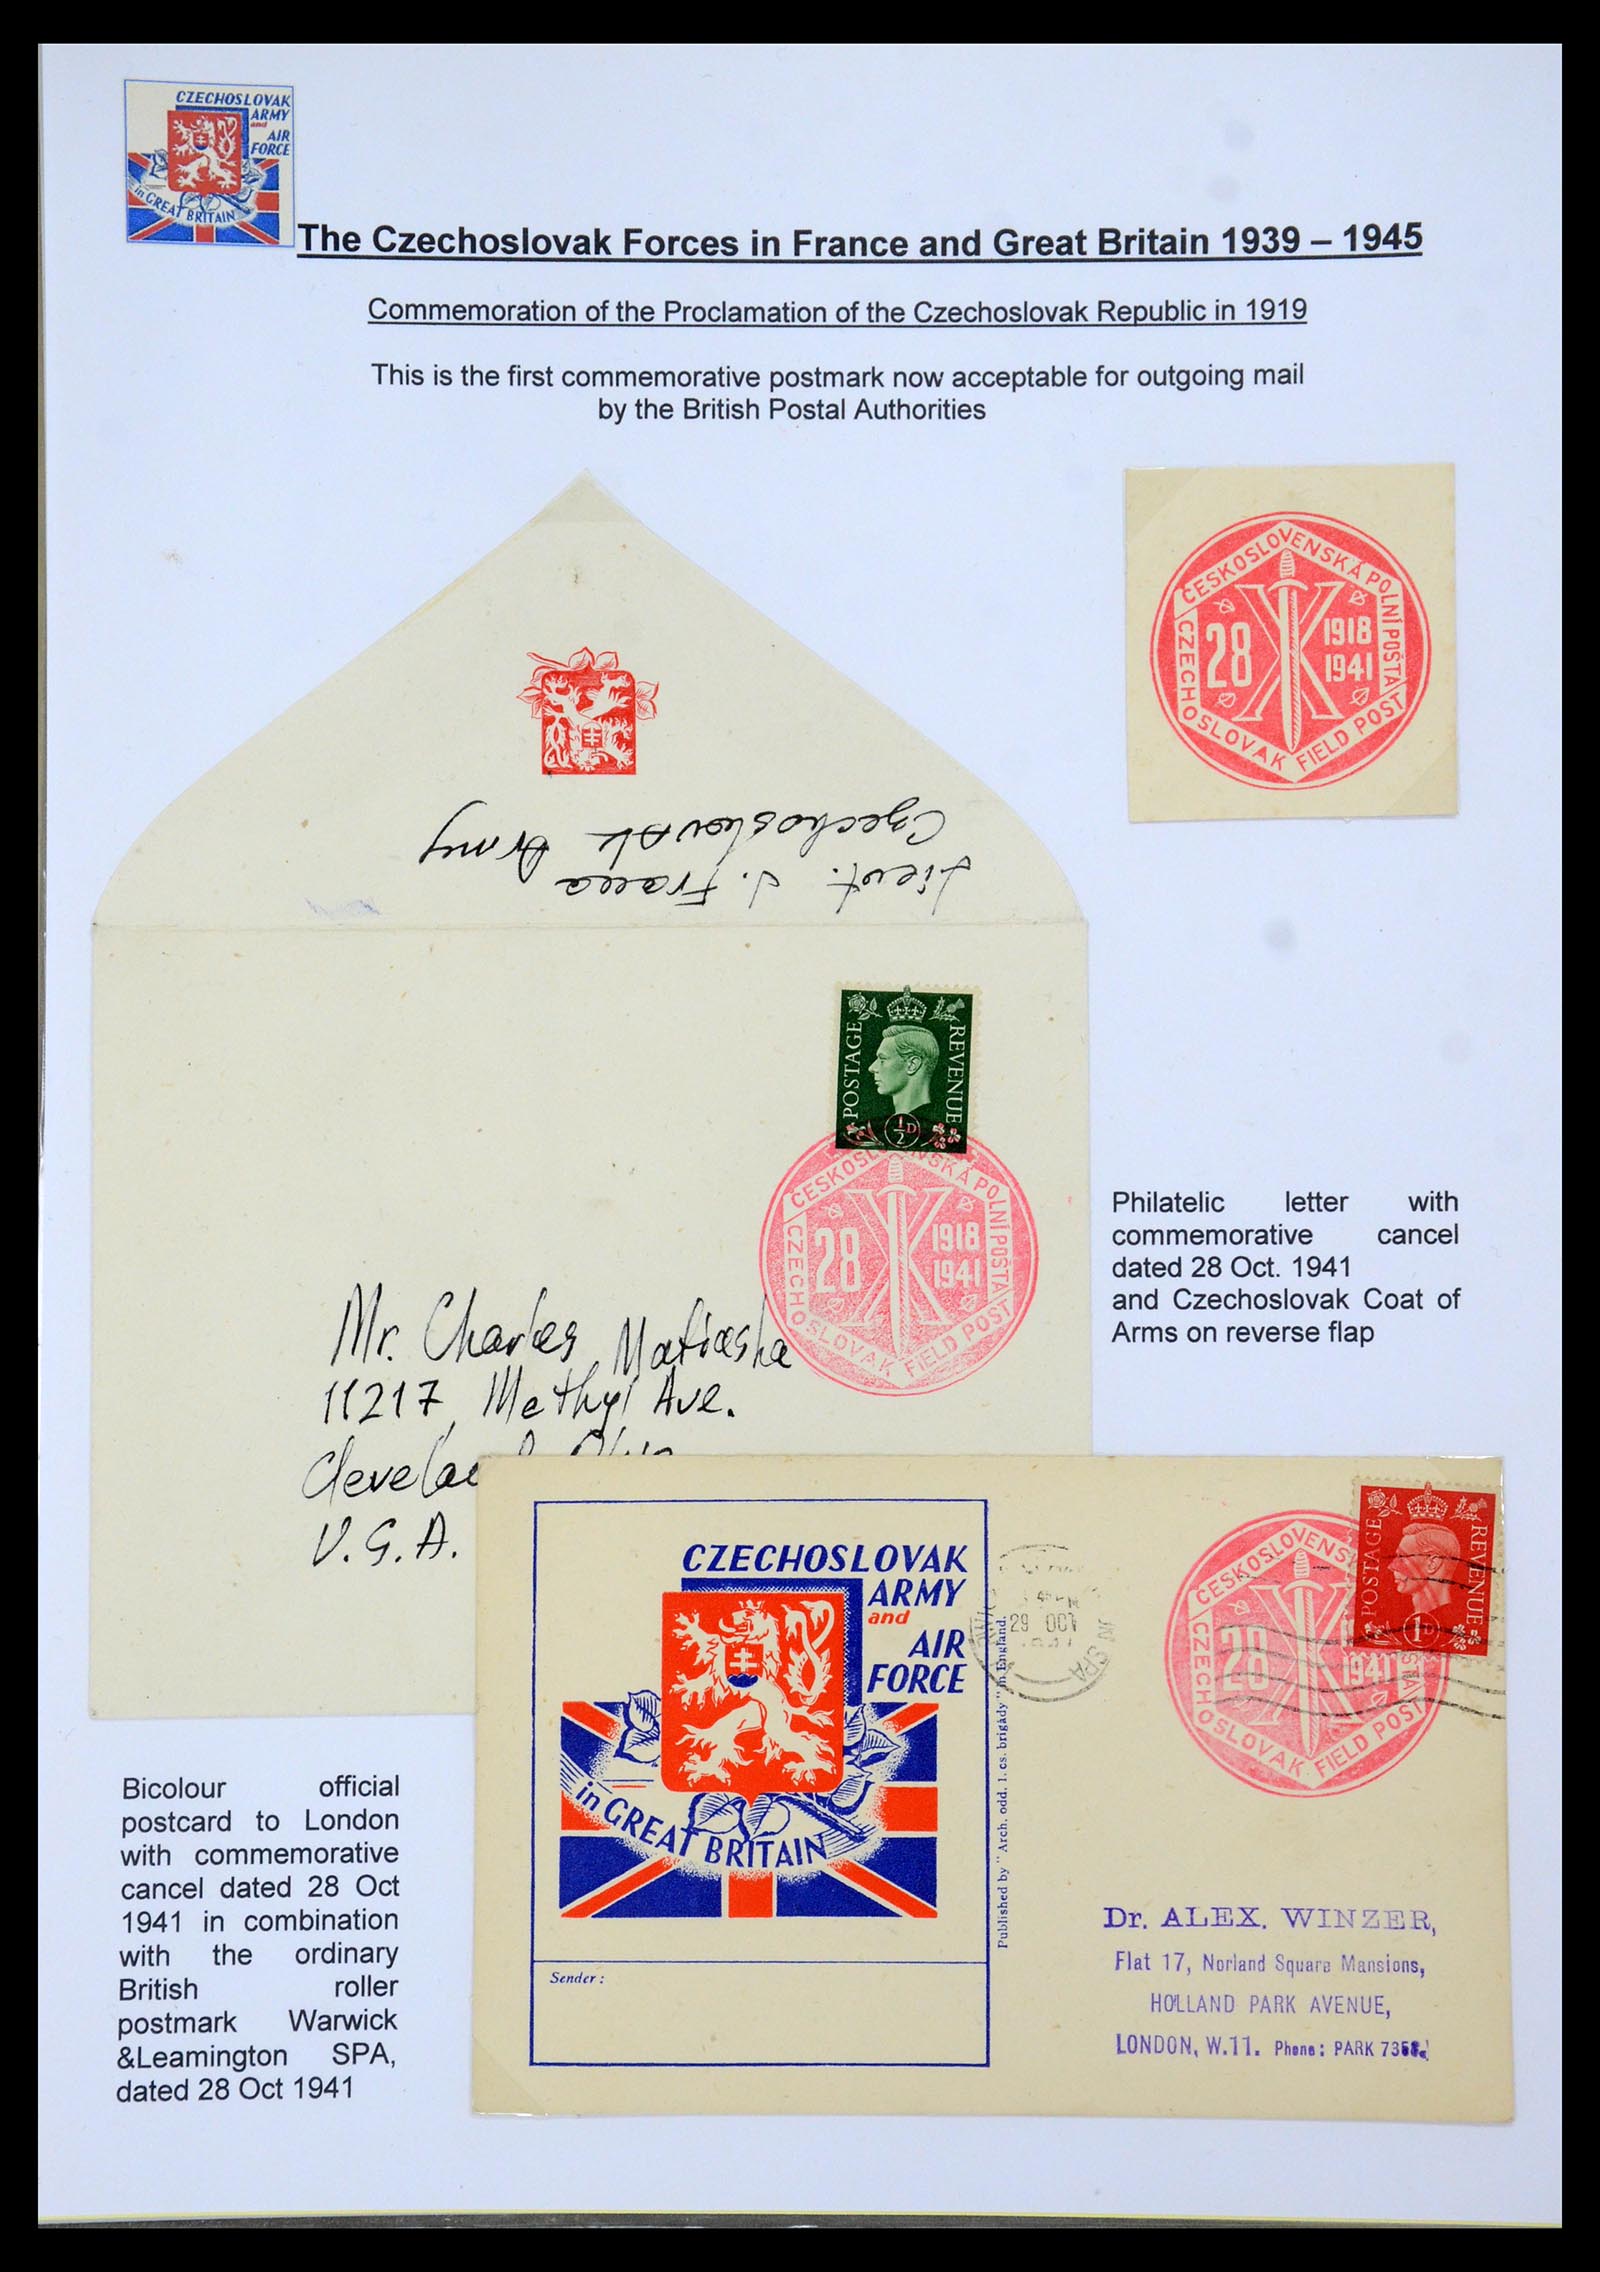 35574 051 - Stamp Collection 35574 Czechoslovak forces in France and Great Britain 1